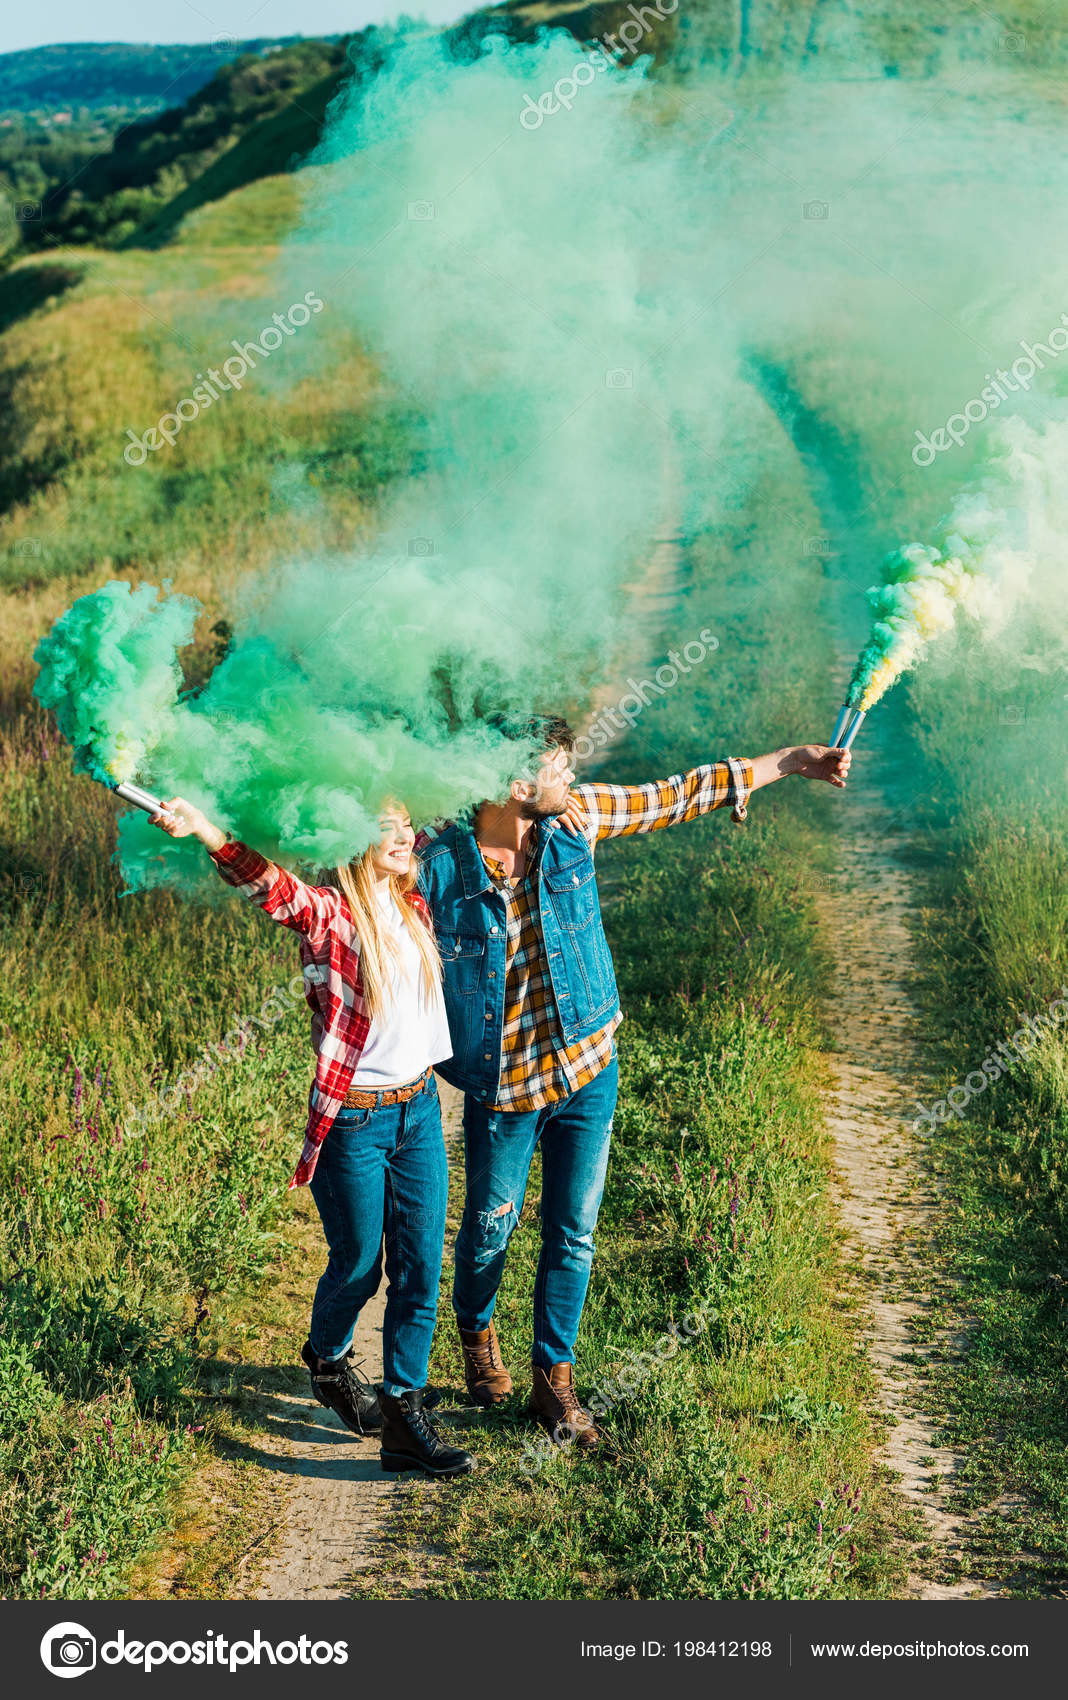 Where to Buy Smoke Bombs for Photography?